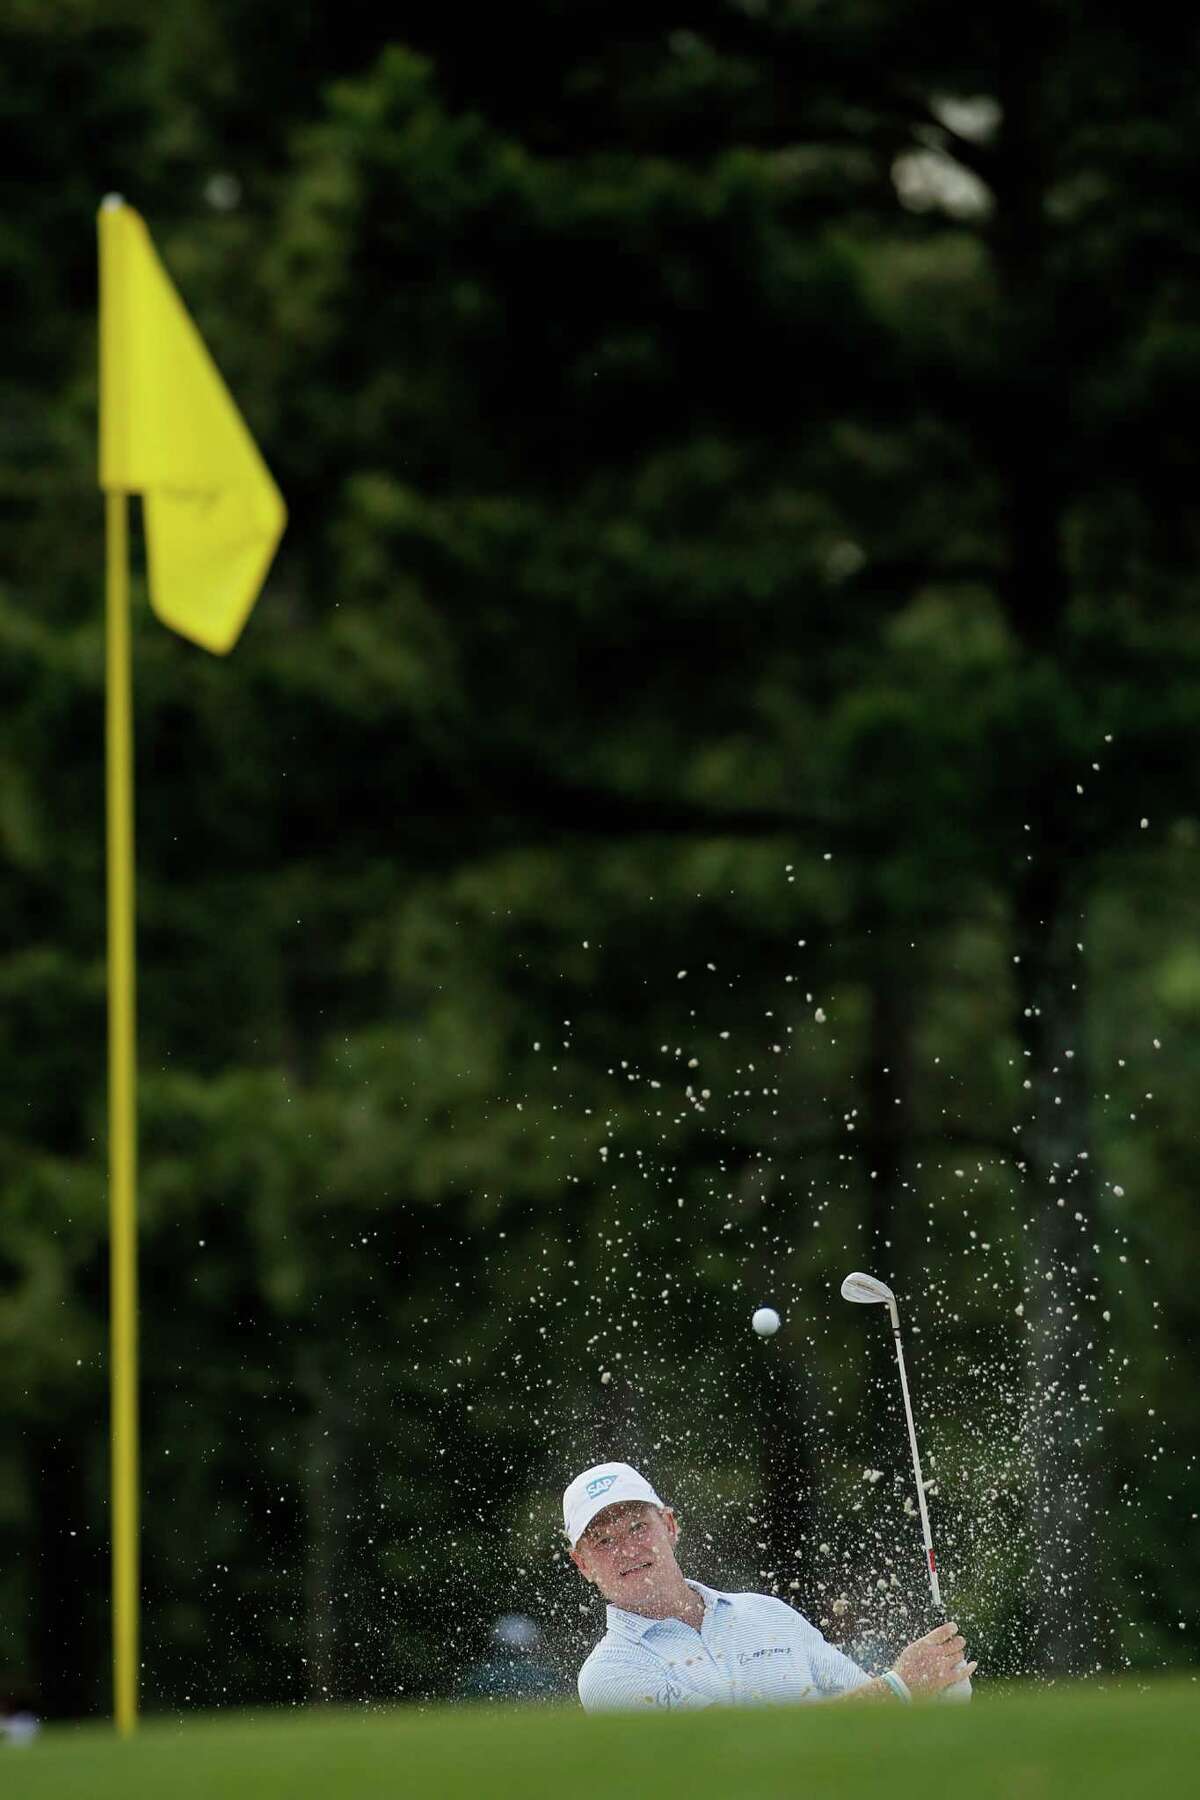 Ernie Els of South Africa plays a bunker shot on the 17th hole during the first round of the 2015 Masters Tournament at Augusta National Golf Club on April 9, 2015, in Augusta, Ga.